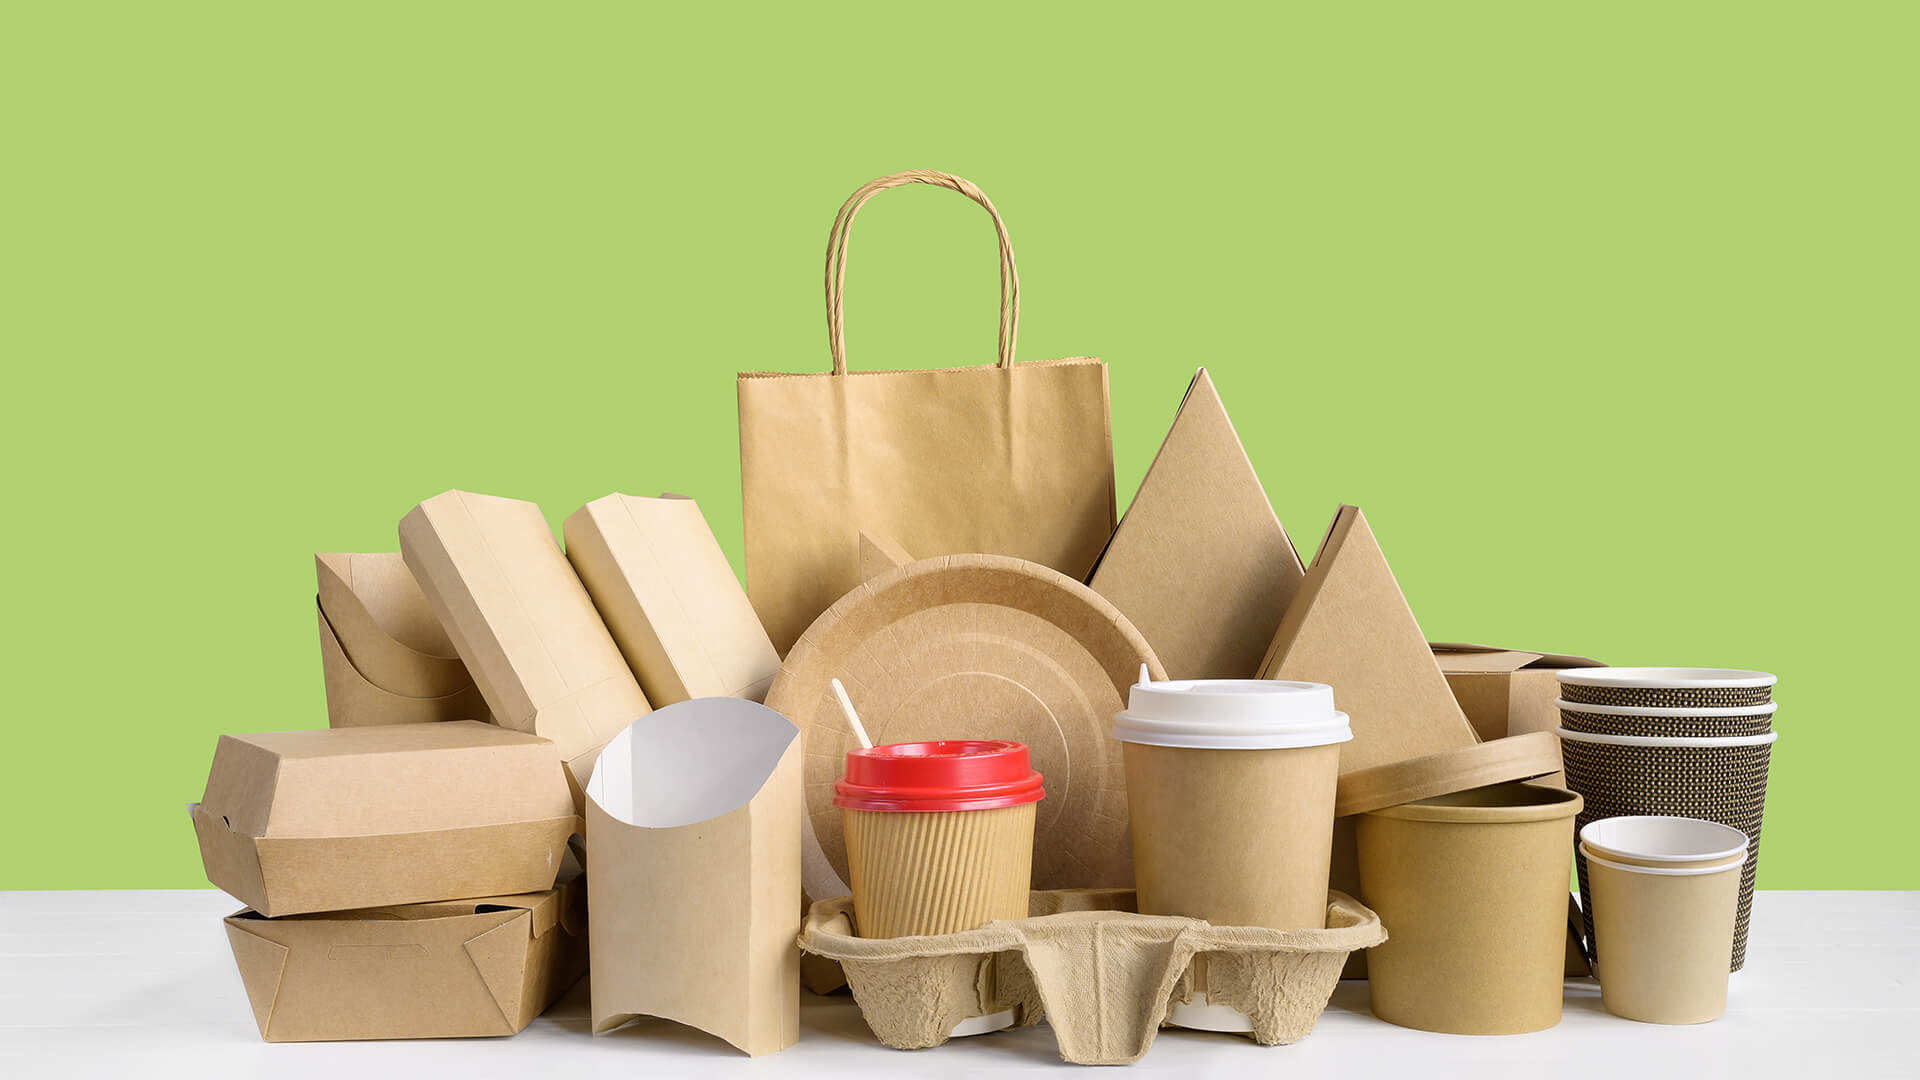 Eco friendly food and drink containers